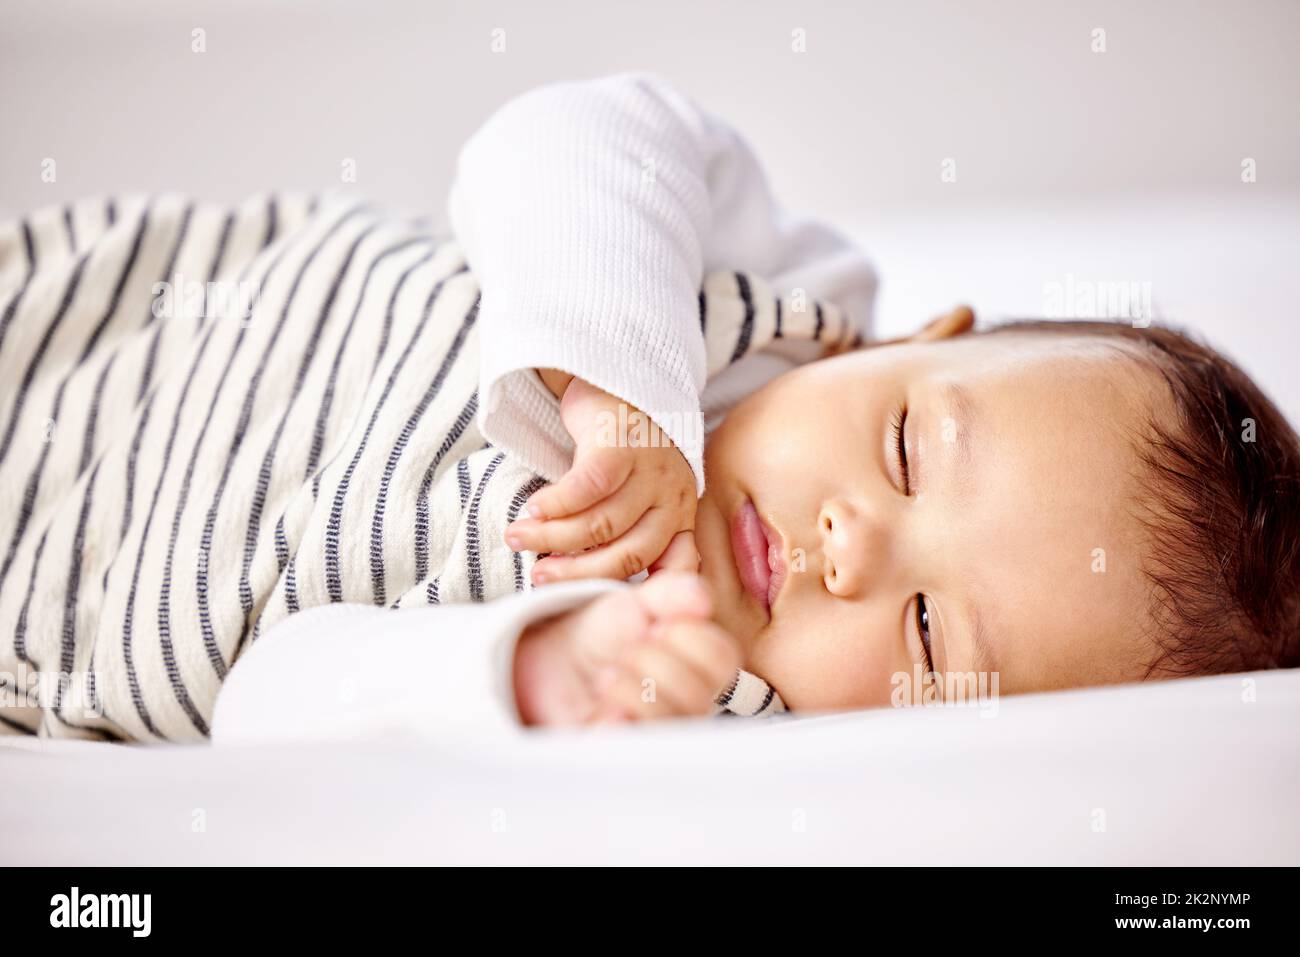 Time to count some sheep. Shot of a little baby sleeping. Stock Photo